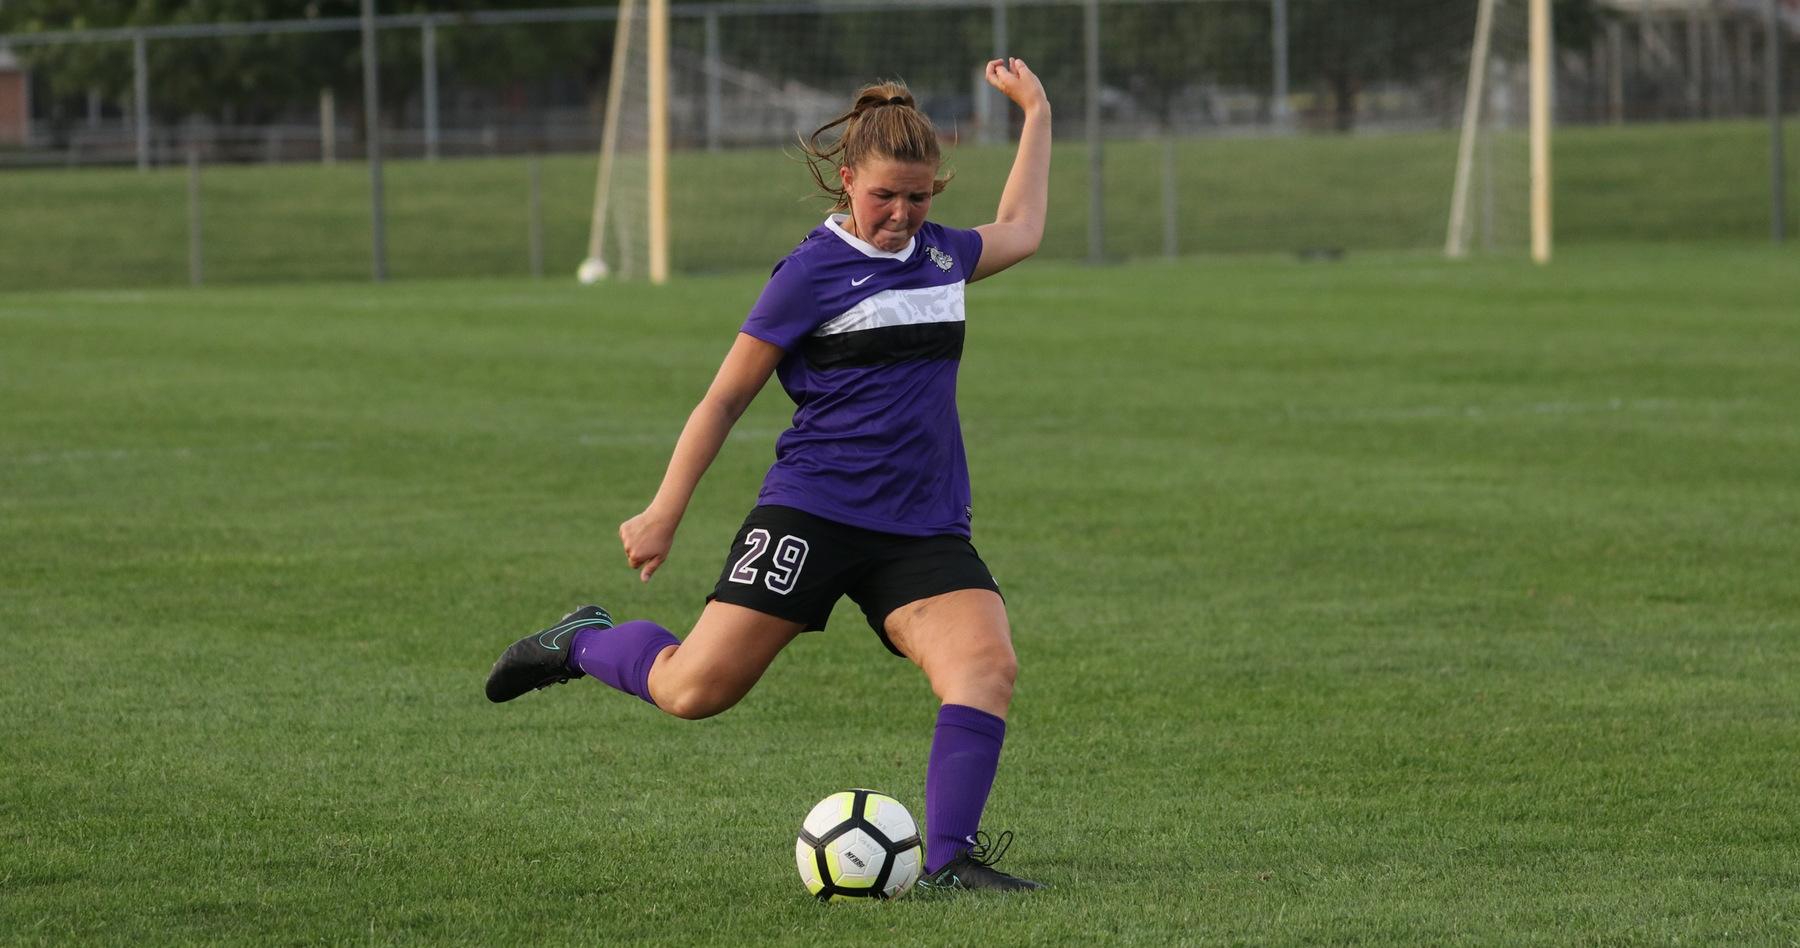 @bhsdogs_gsoccer's Jayden Gibson named to ISCA All-State team